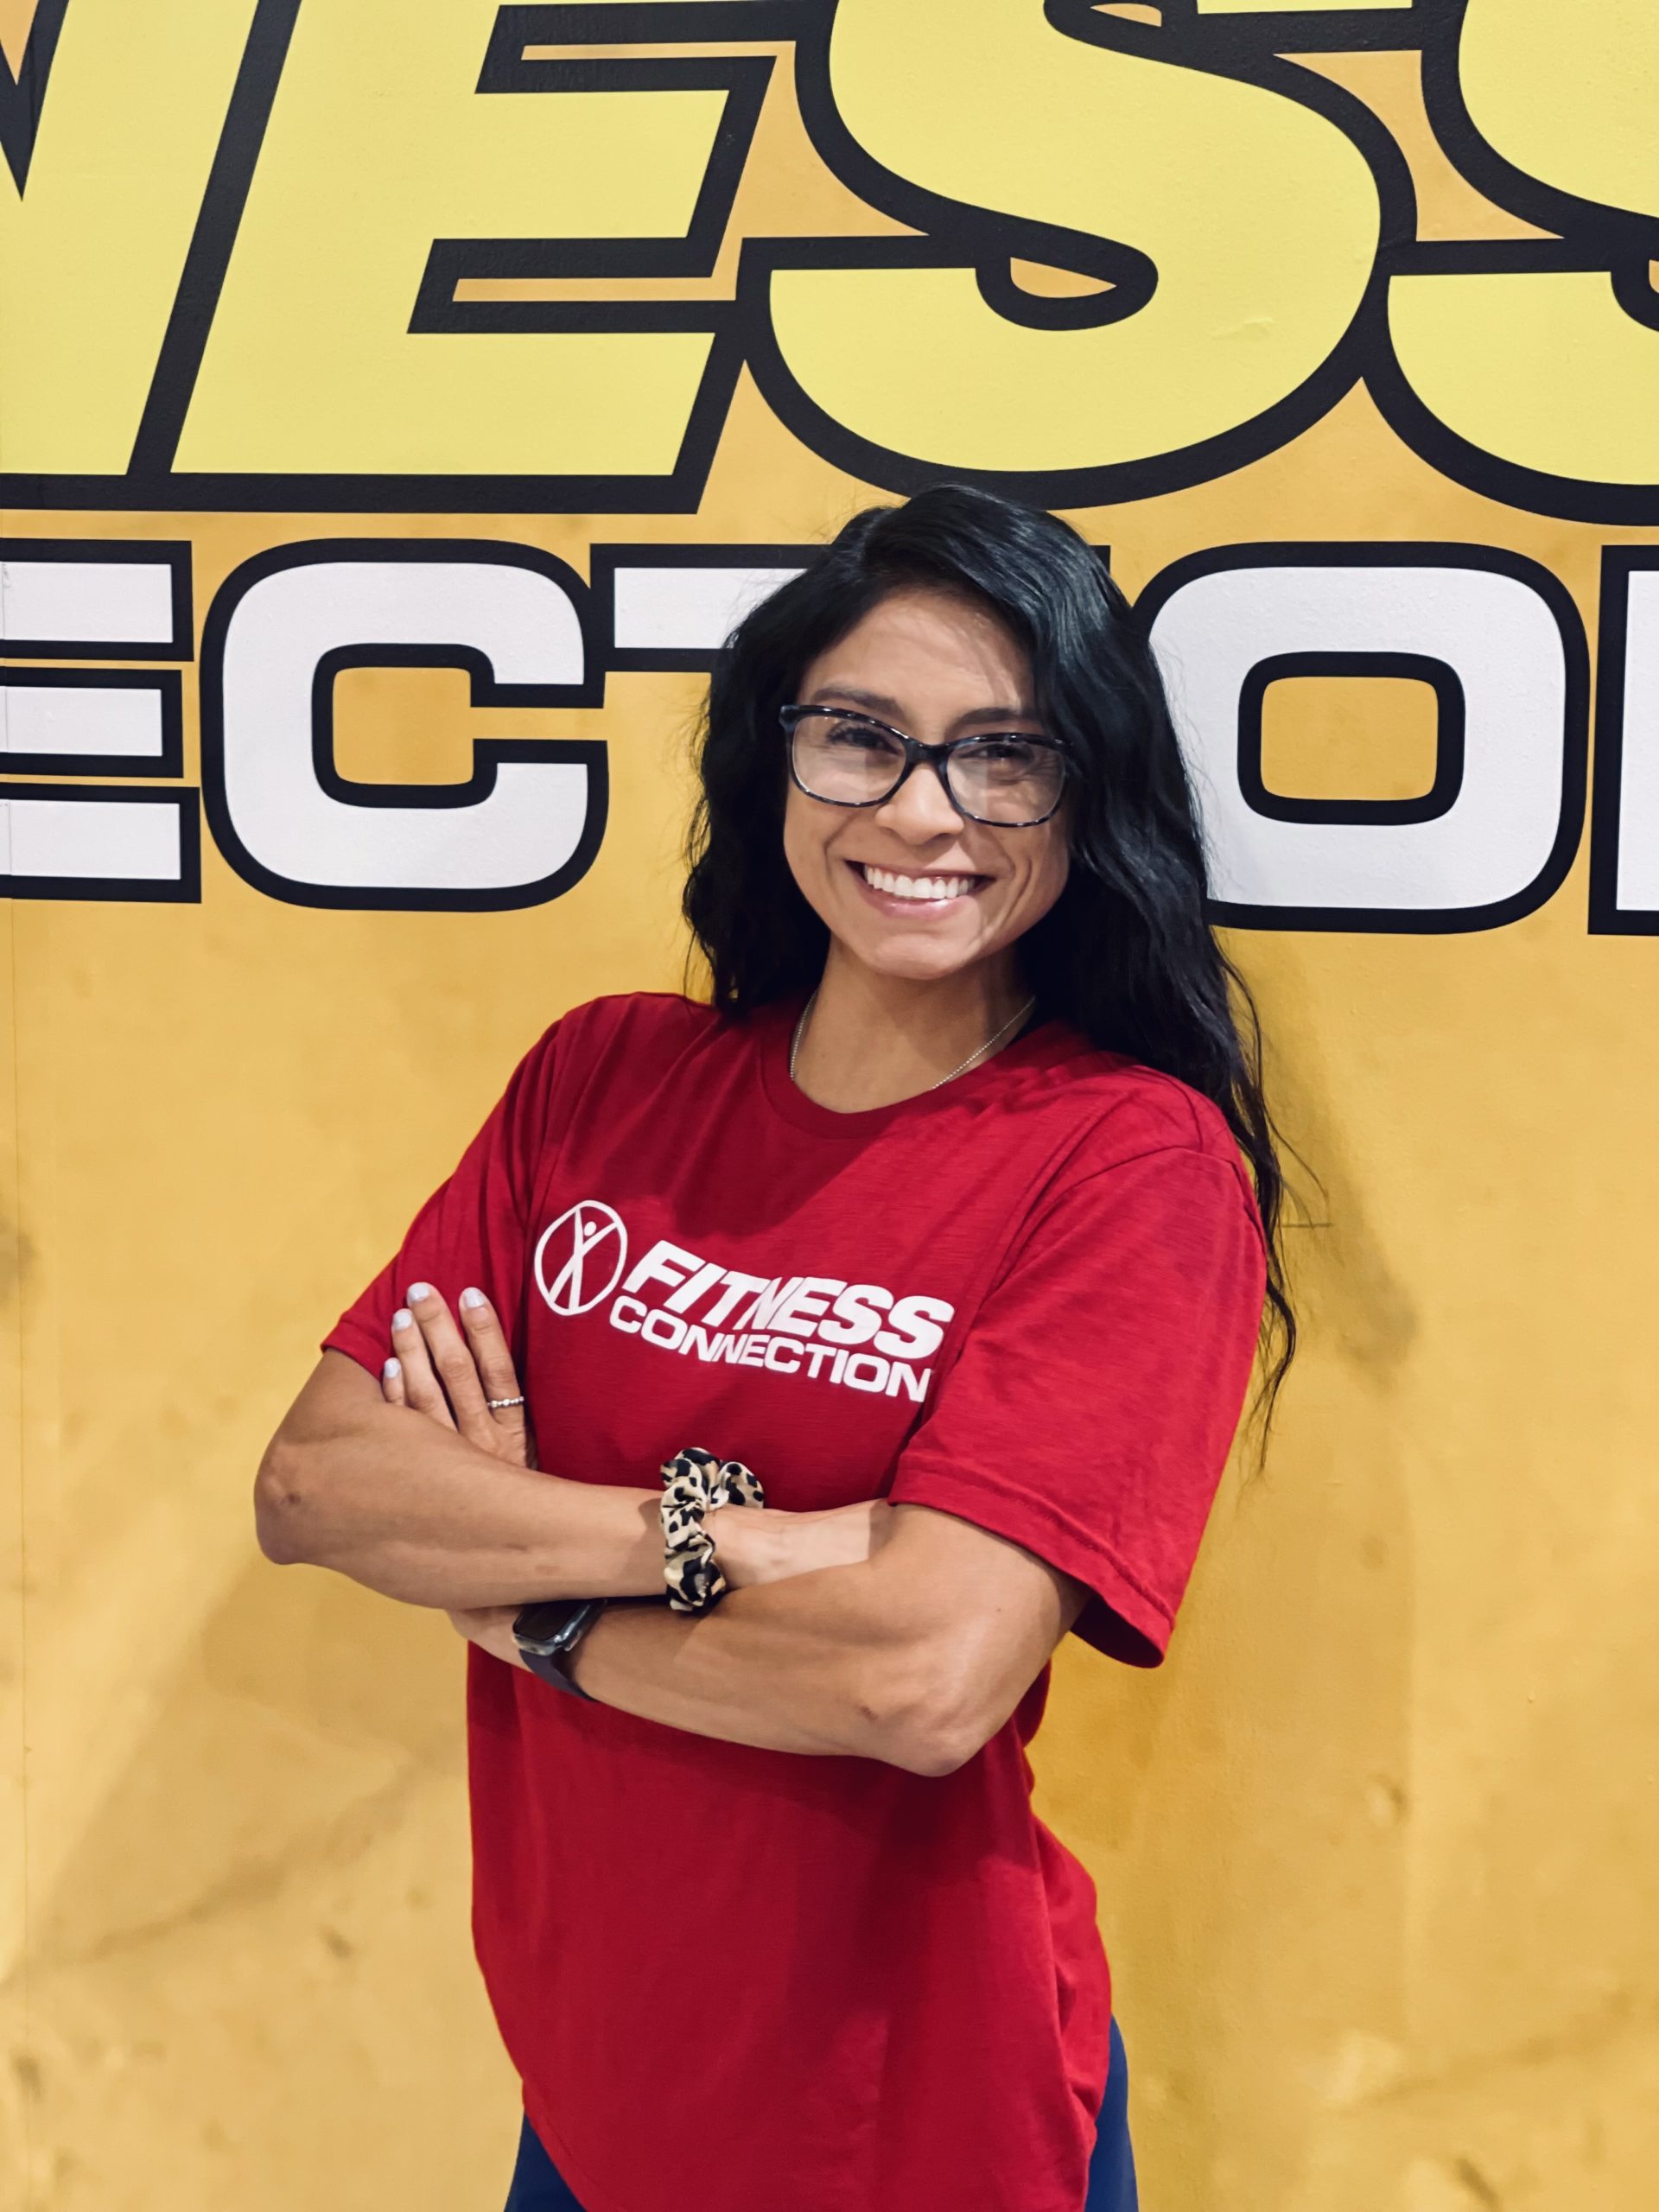 Bre M. Fitness Connection Club Manager for Lewisville Texas